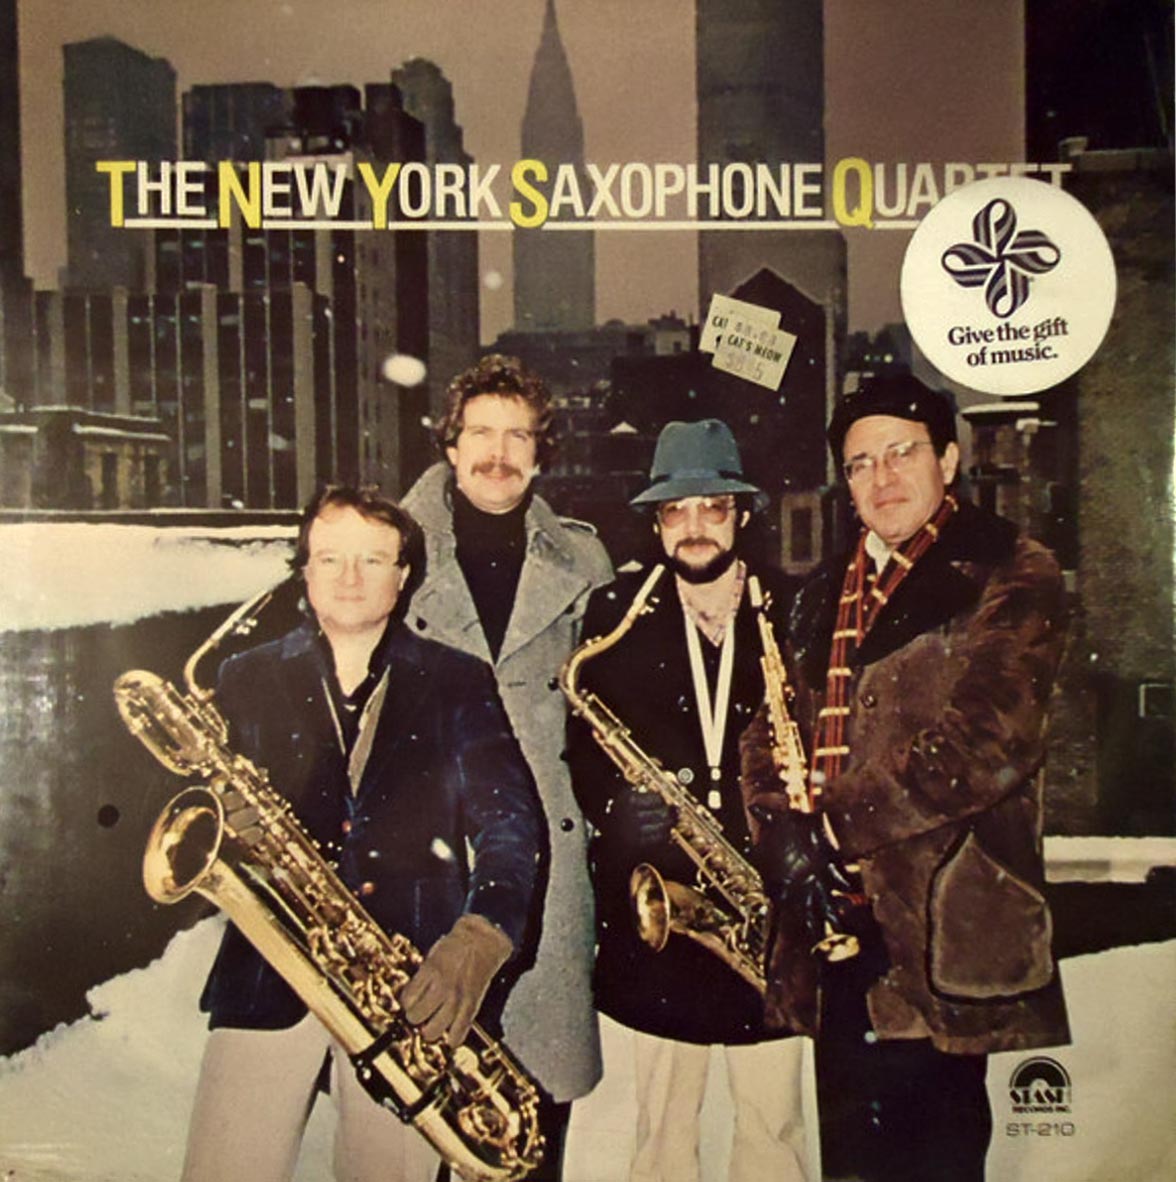 Album cover photo featuring the New York Saxophone Quartet: Wally Kane, Ray Beckenstein, Dennis Anderson, Billy Kerr. Sauter's Saxophone Quartet #1 was one of a seven-composer compilation.